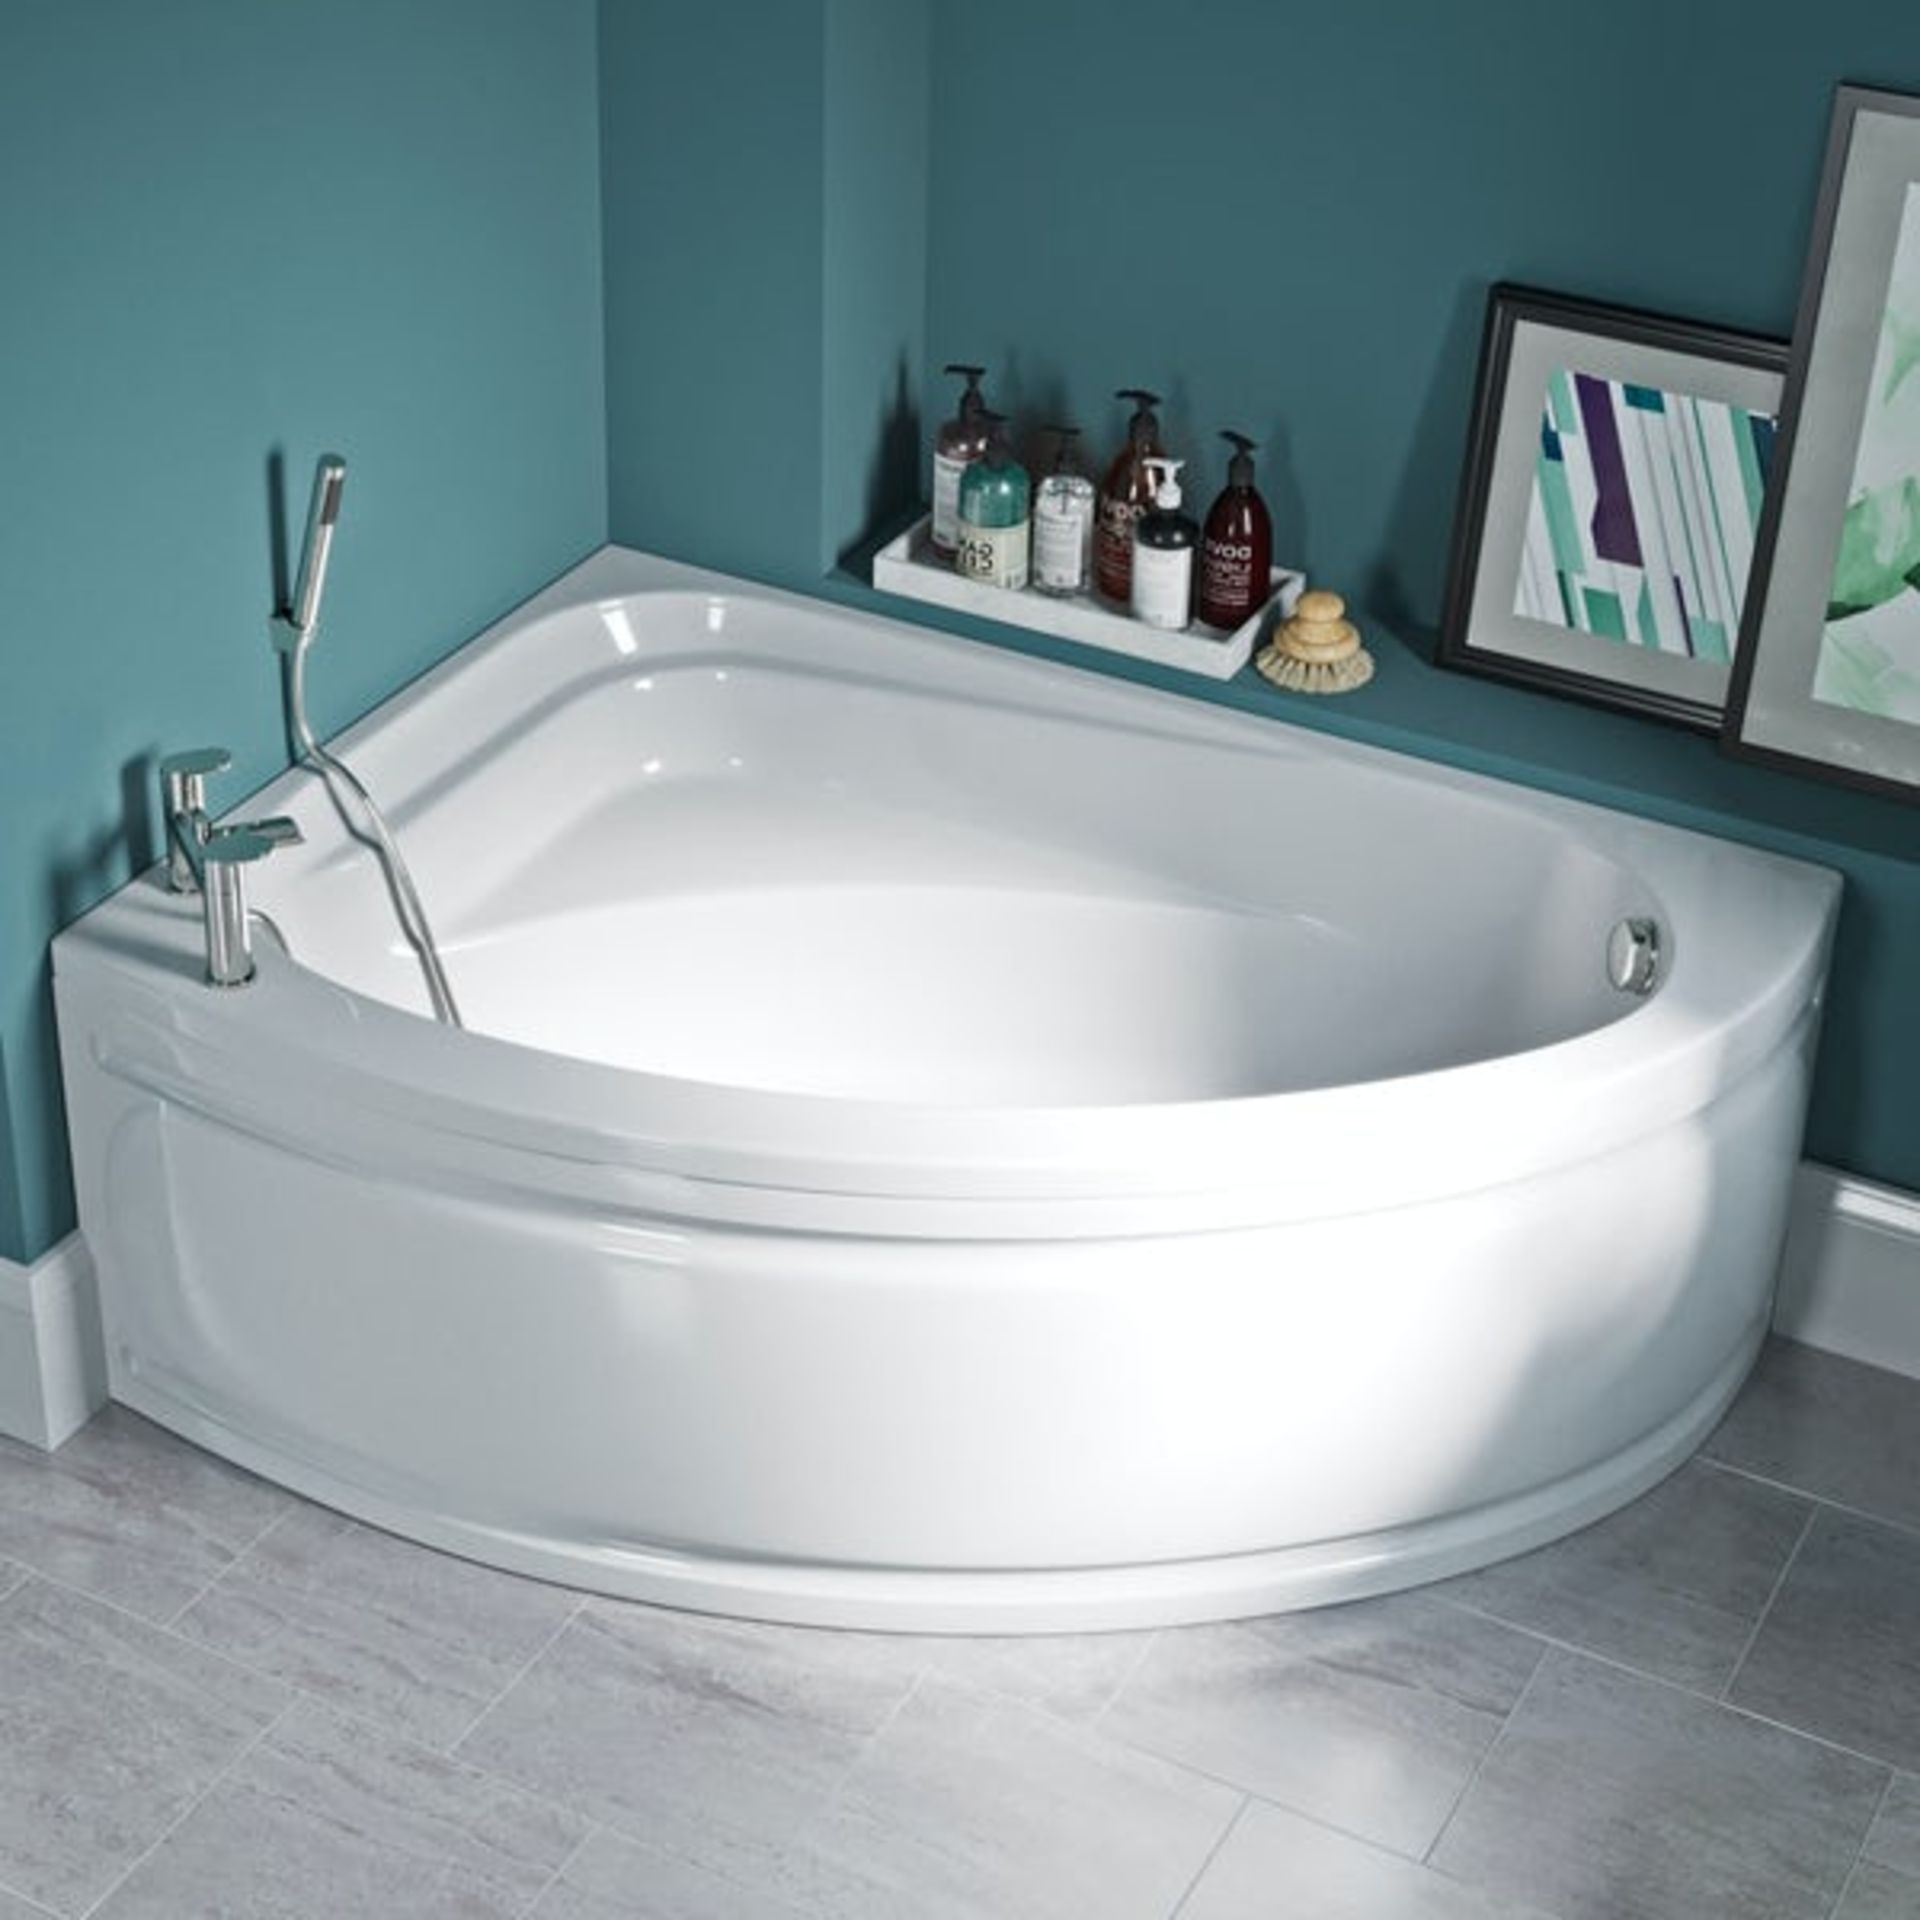 NEW (G108) 1000x1500mm Elsdon corner bath with seat. RRP £339.99. Panel not included. Manuf...